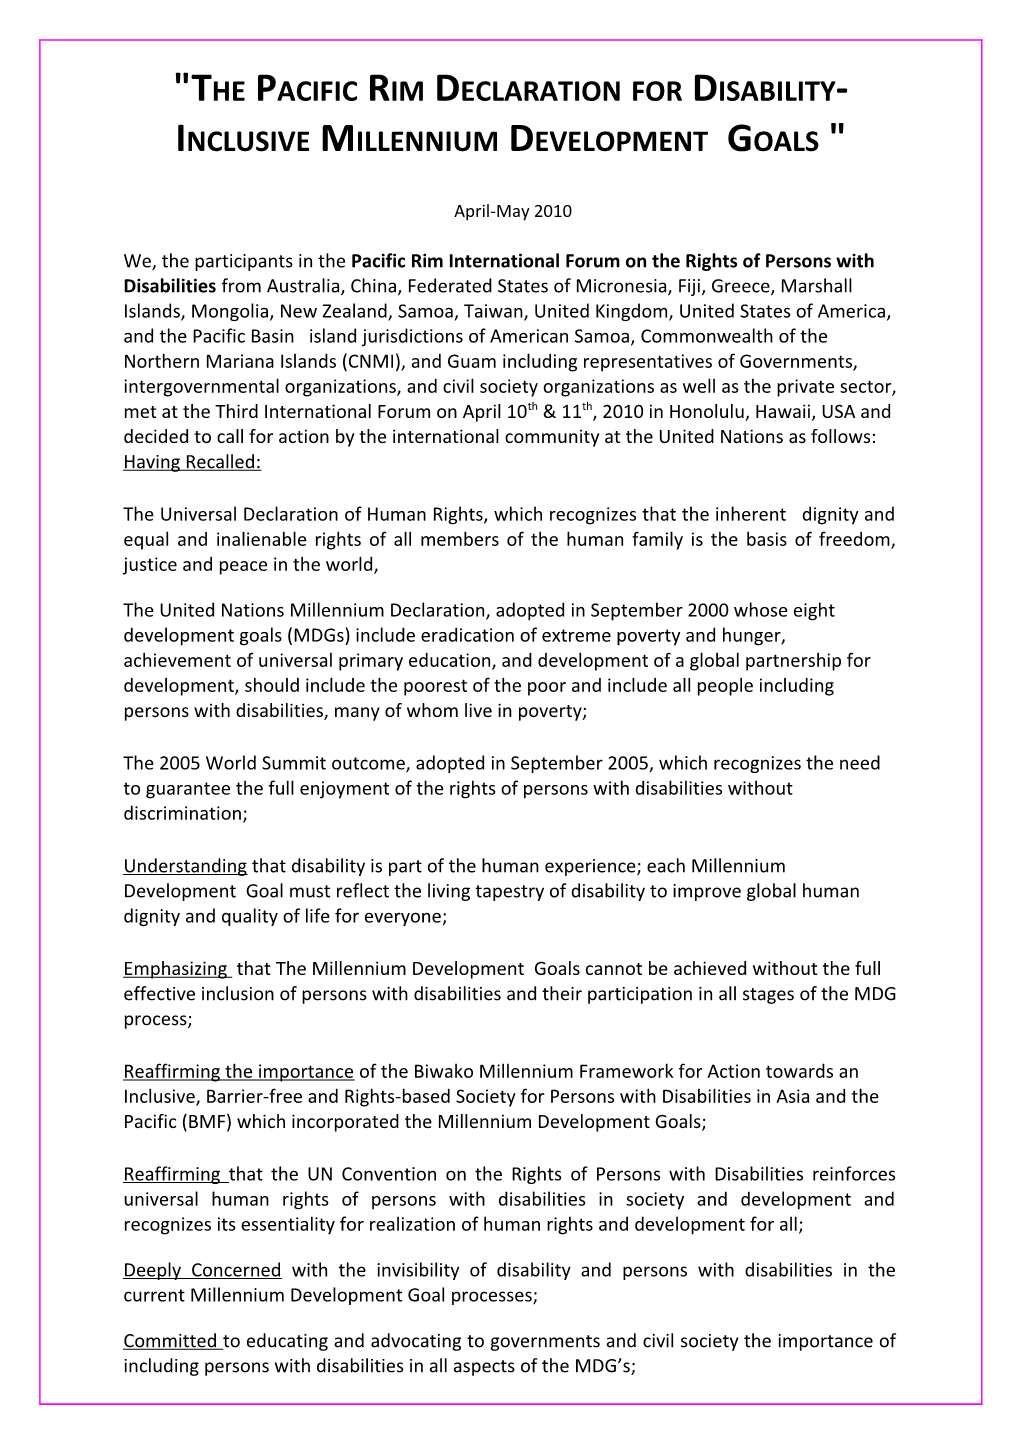 Pacific Rim Declaration for Disability-Inclusive Mdgs